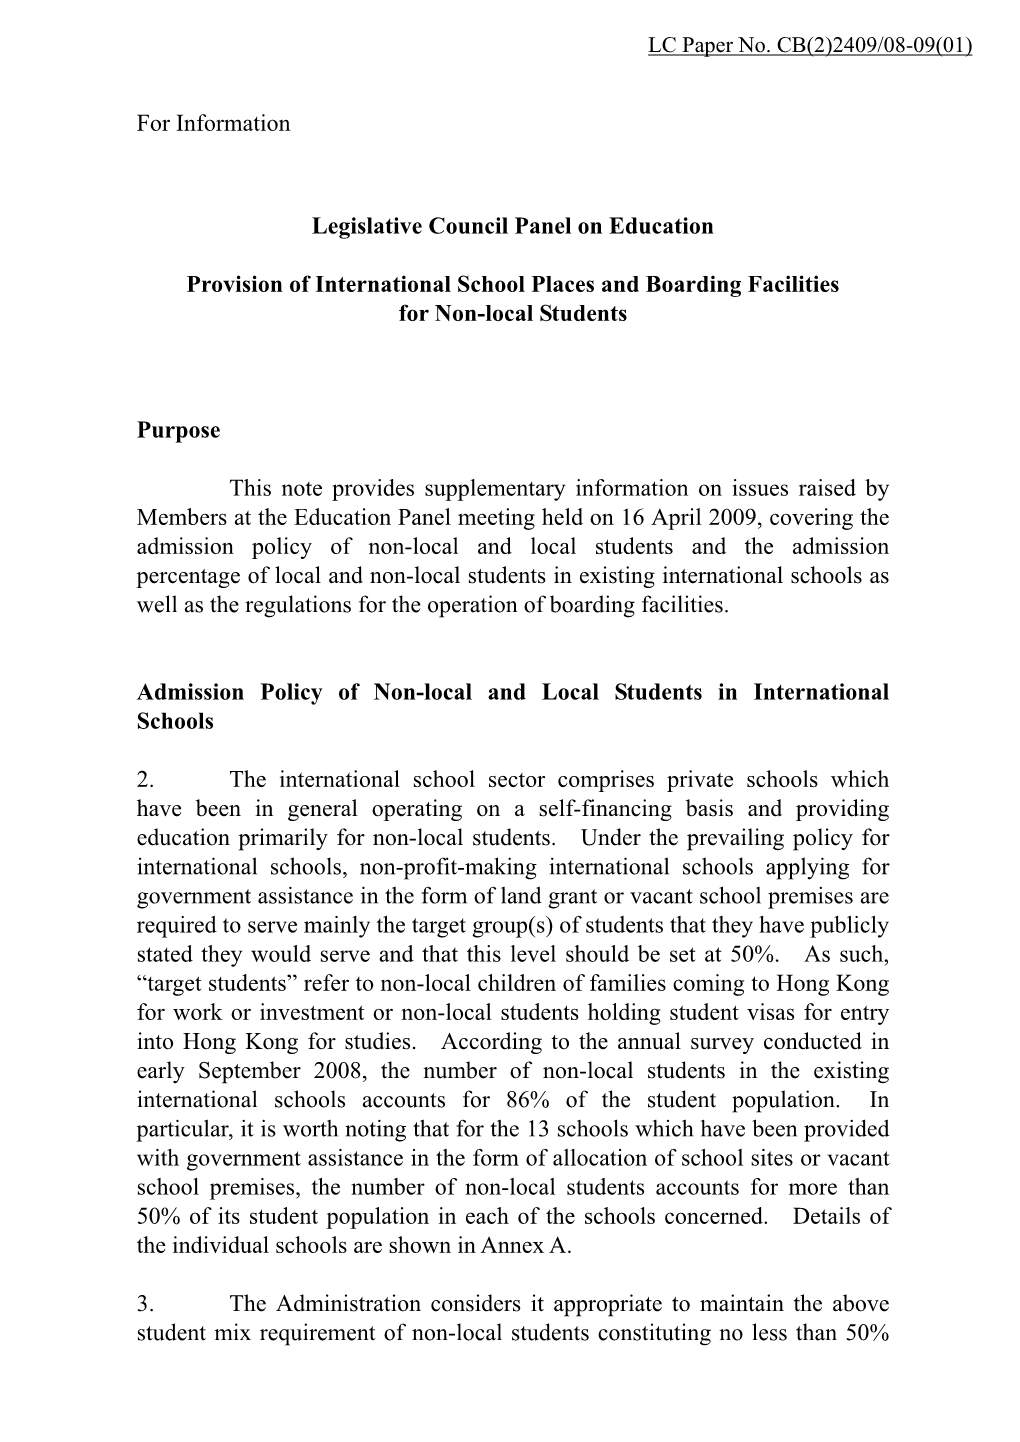 Provision of International School Places and Boarding Facilities for Non-Local Students